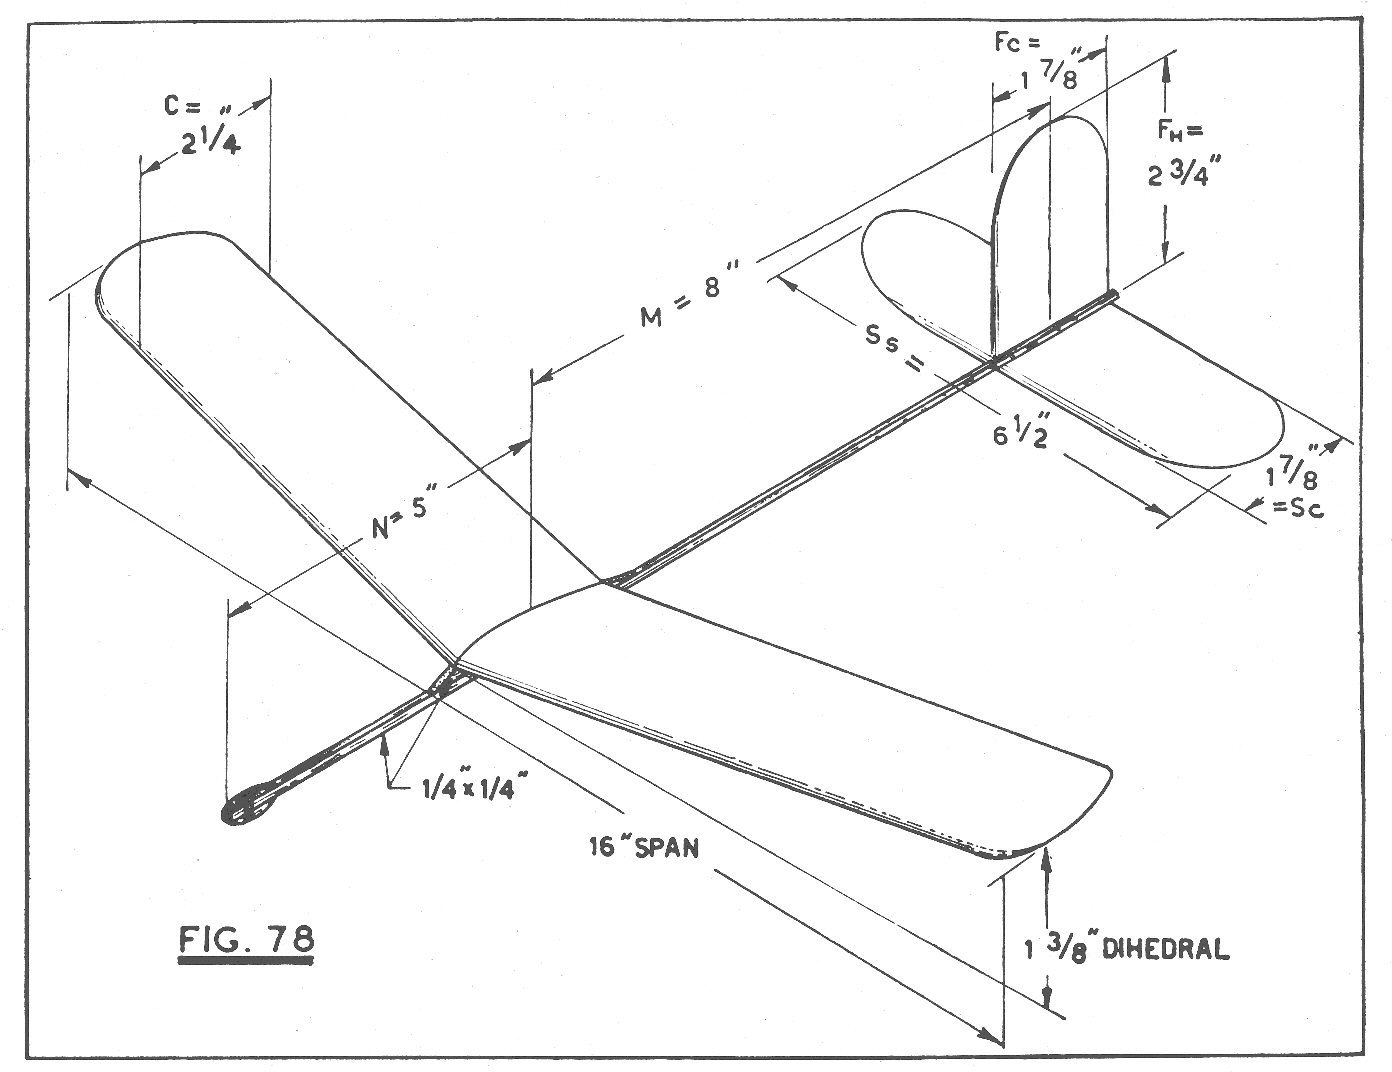 Planning and building an elementary contest glider